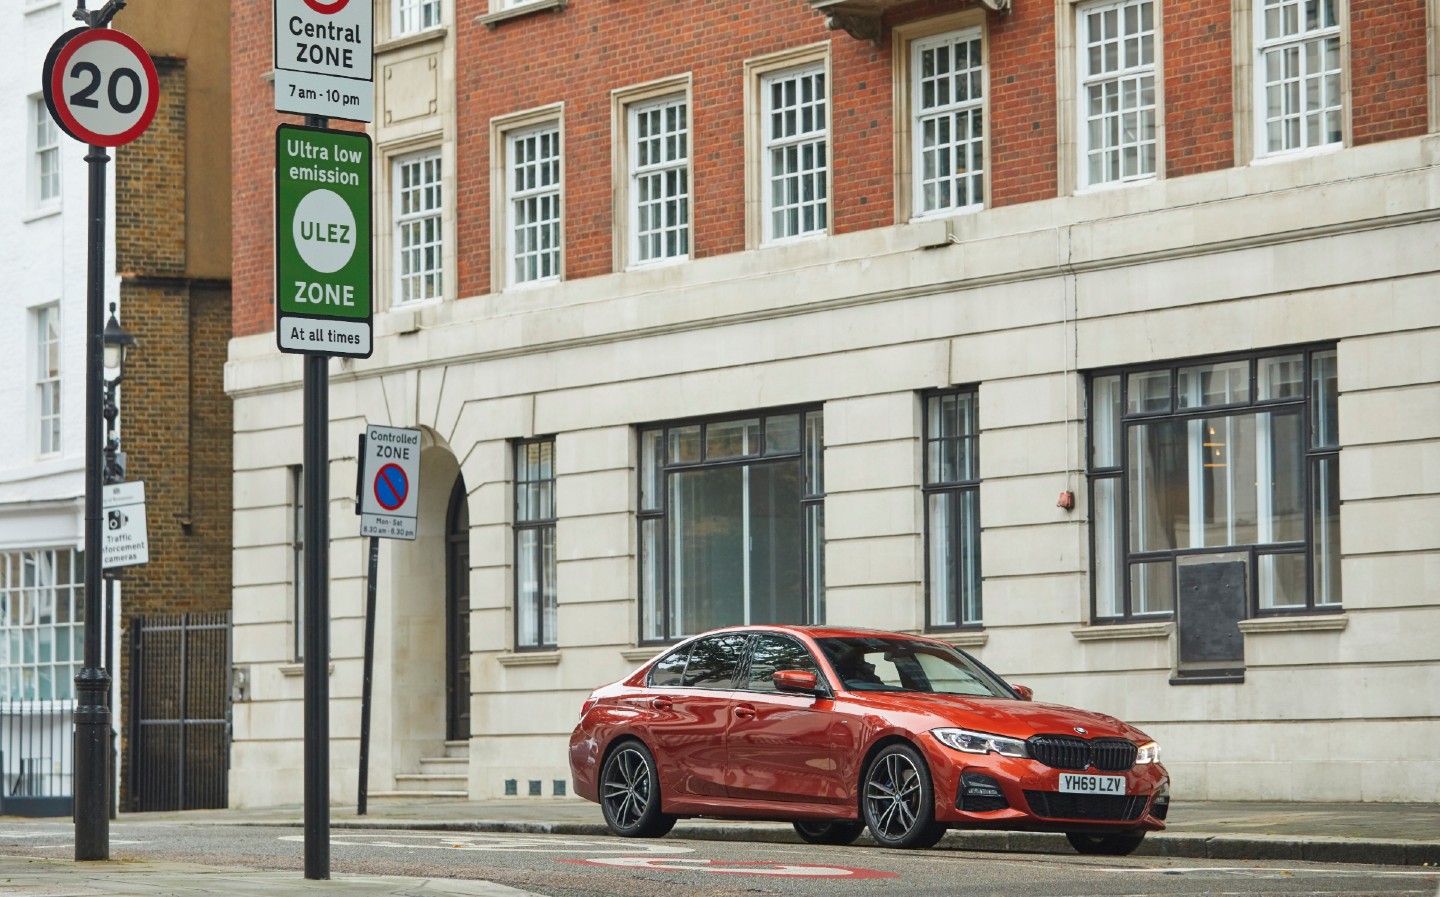 BMW eDrive Zones introduces in London and Birmingham, using geo-fencing technology for plug-in hybrid cars